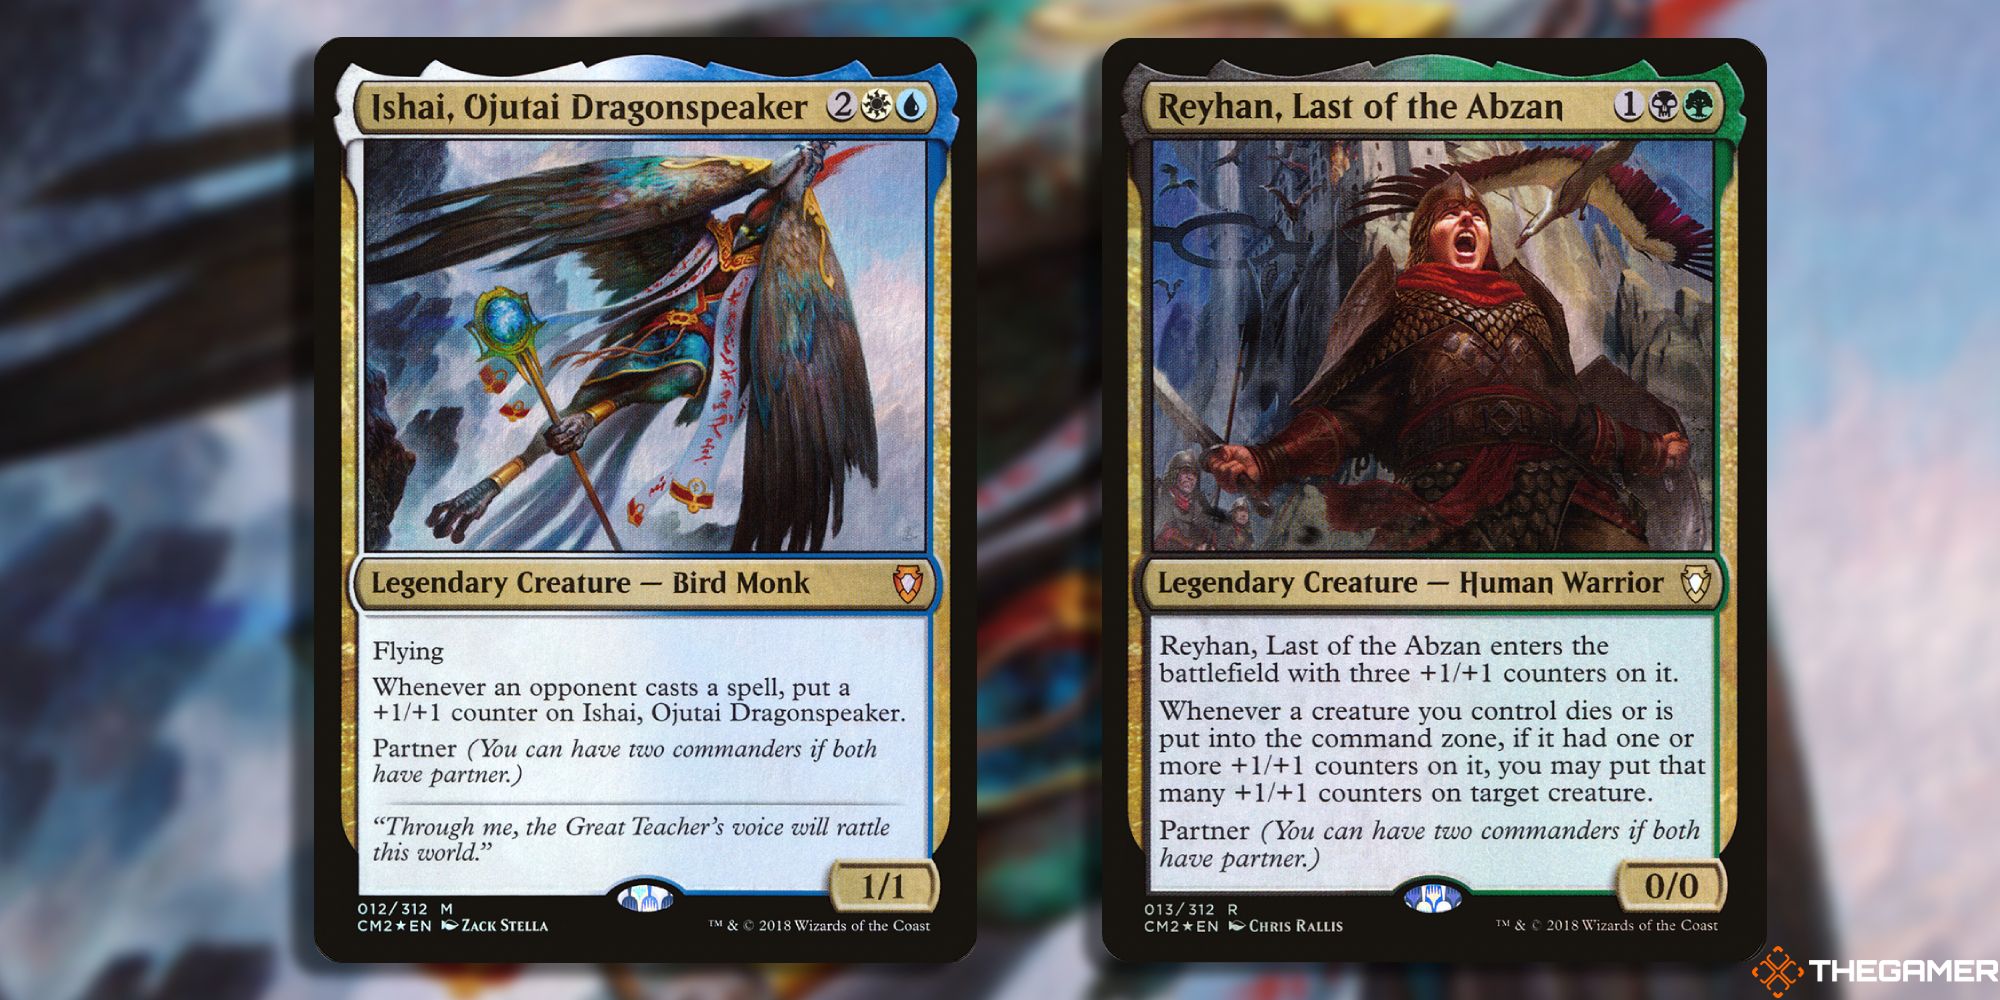 Image of Ishai, Ojutai Dragonspeaker, and Reyhan, Last of the Abzan cards in Magic: The Gathering, with artwork by Zack Stella and Chris Rallis